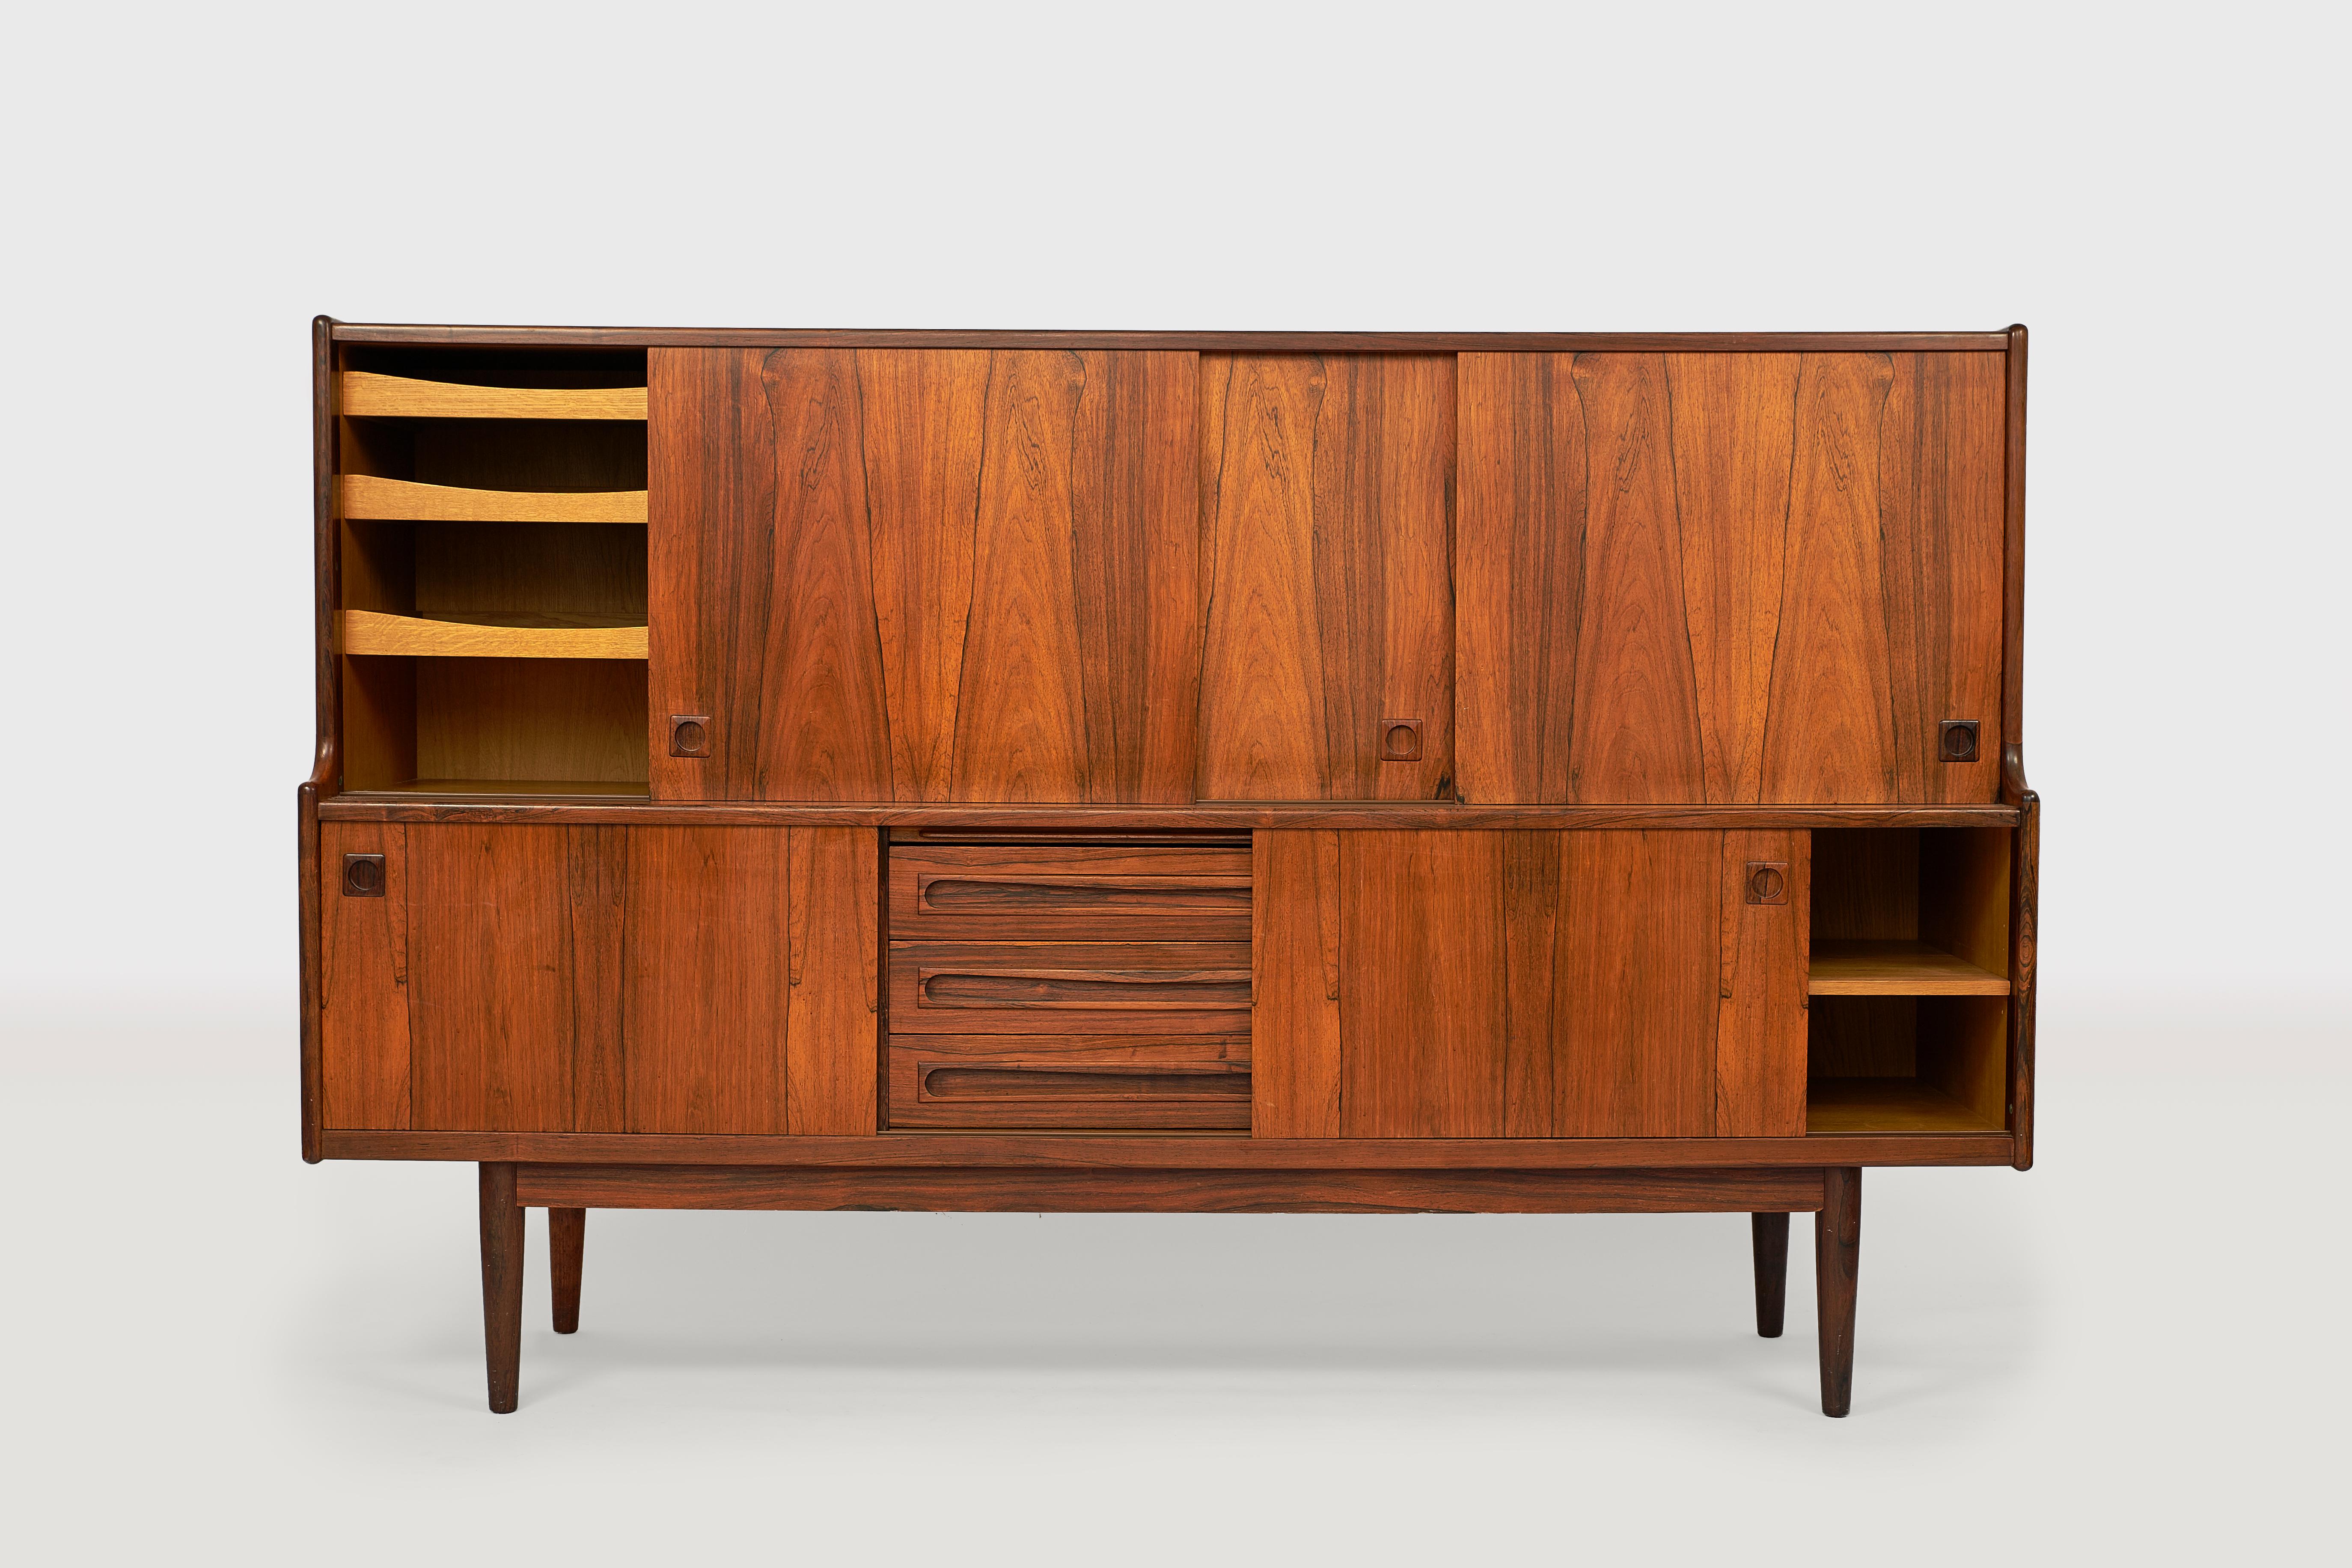 Midcentury rosewood cabinet by Johannes Andersen for Skaaning Furniture with elegant lines and excellent craftsmanship. The cabinet has five sliding doors and visible and hidden drawers and shelves. The cabinet is in very good condition with only a